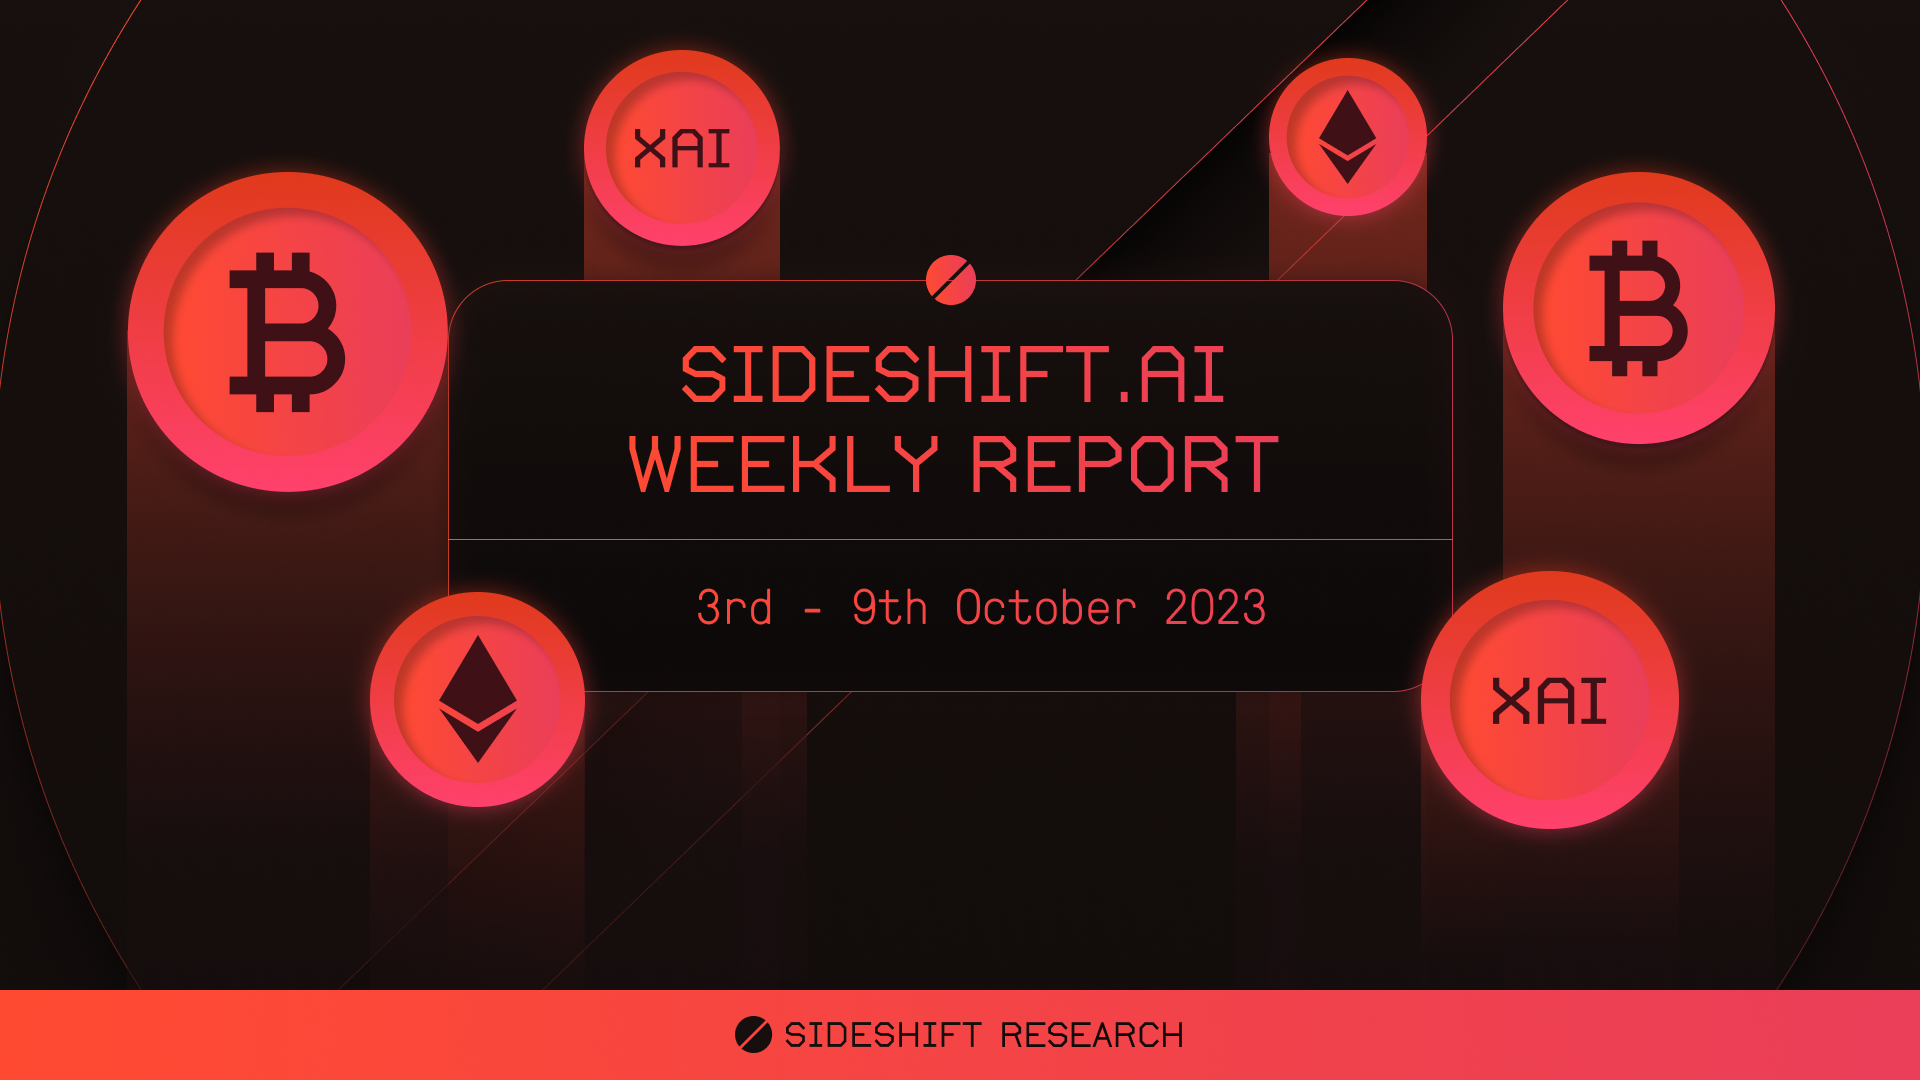 SideShift.ai Weekly Report | 3rd - 9th October 2023